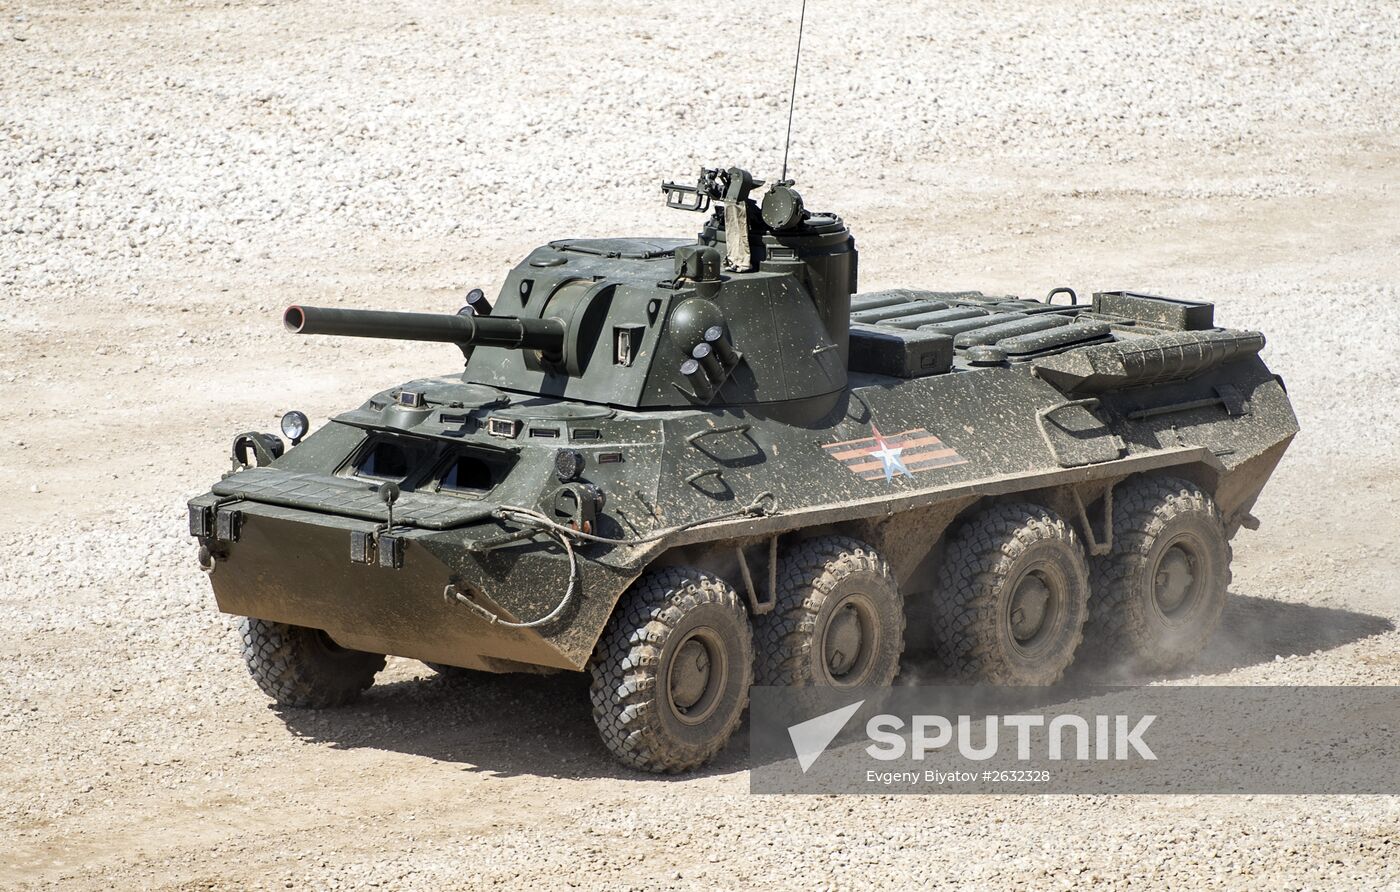 Military equipment displayed in the run-up to Army-2015 international forum